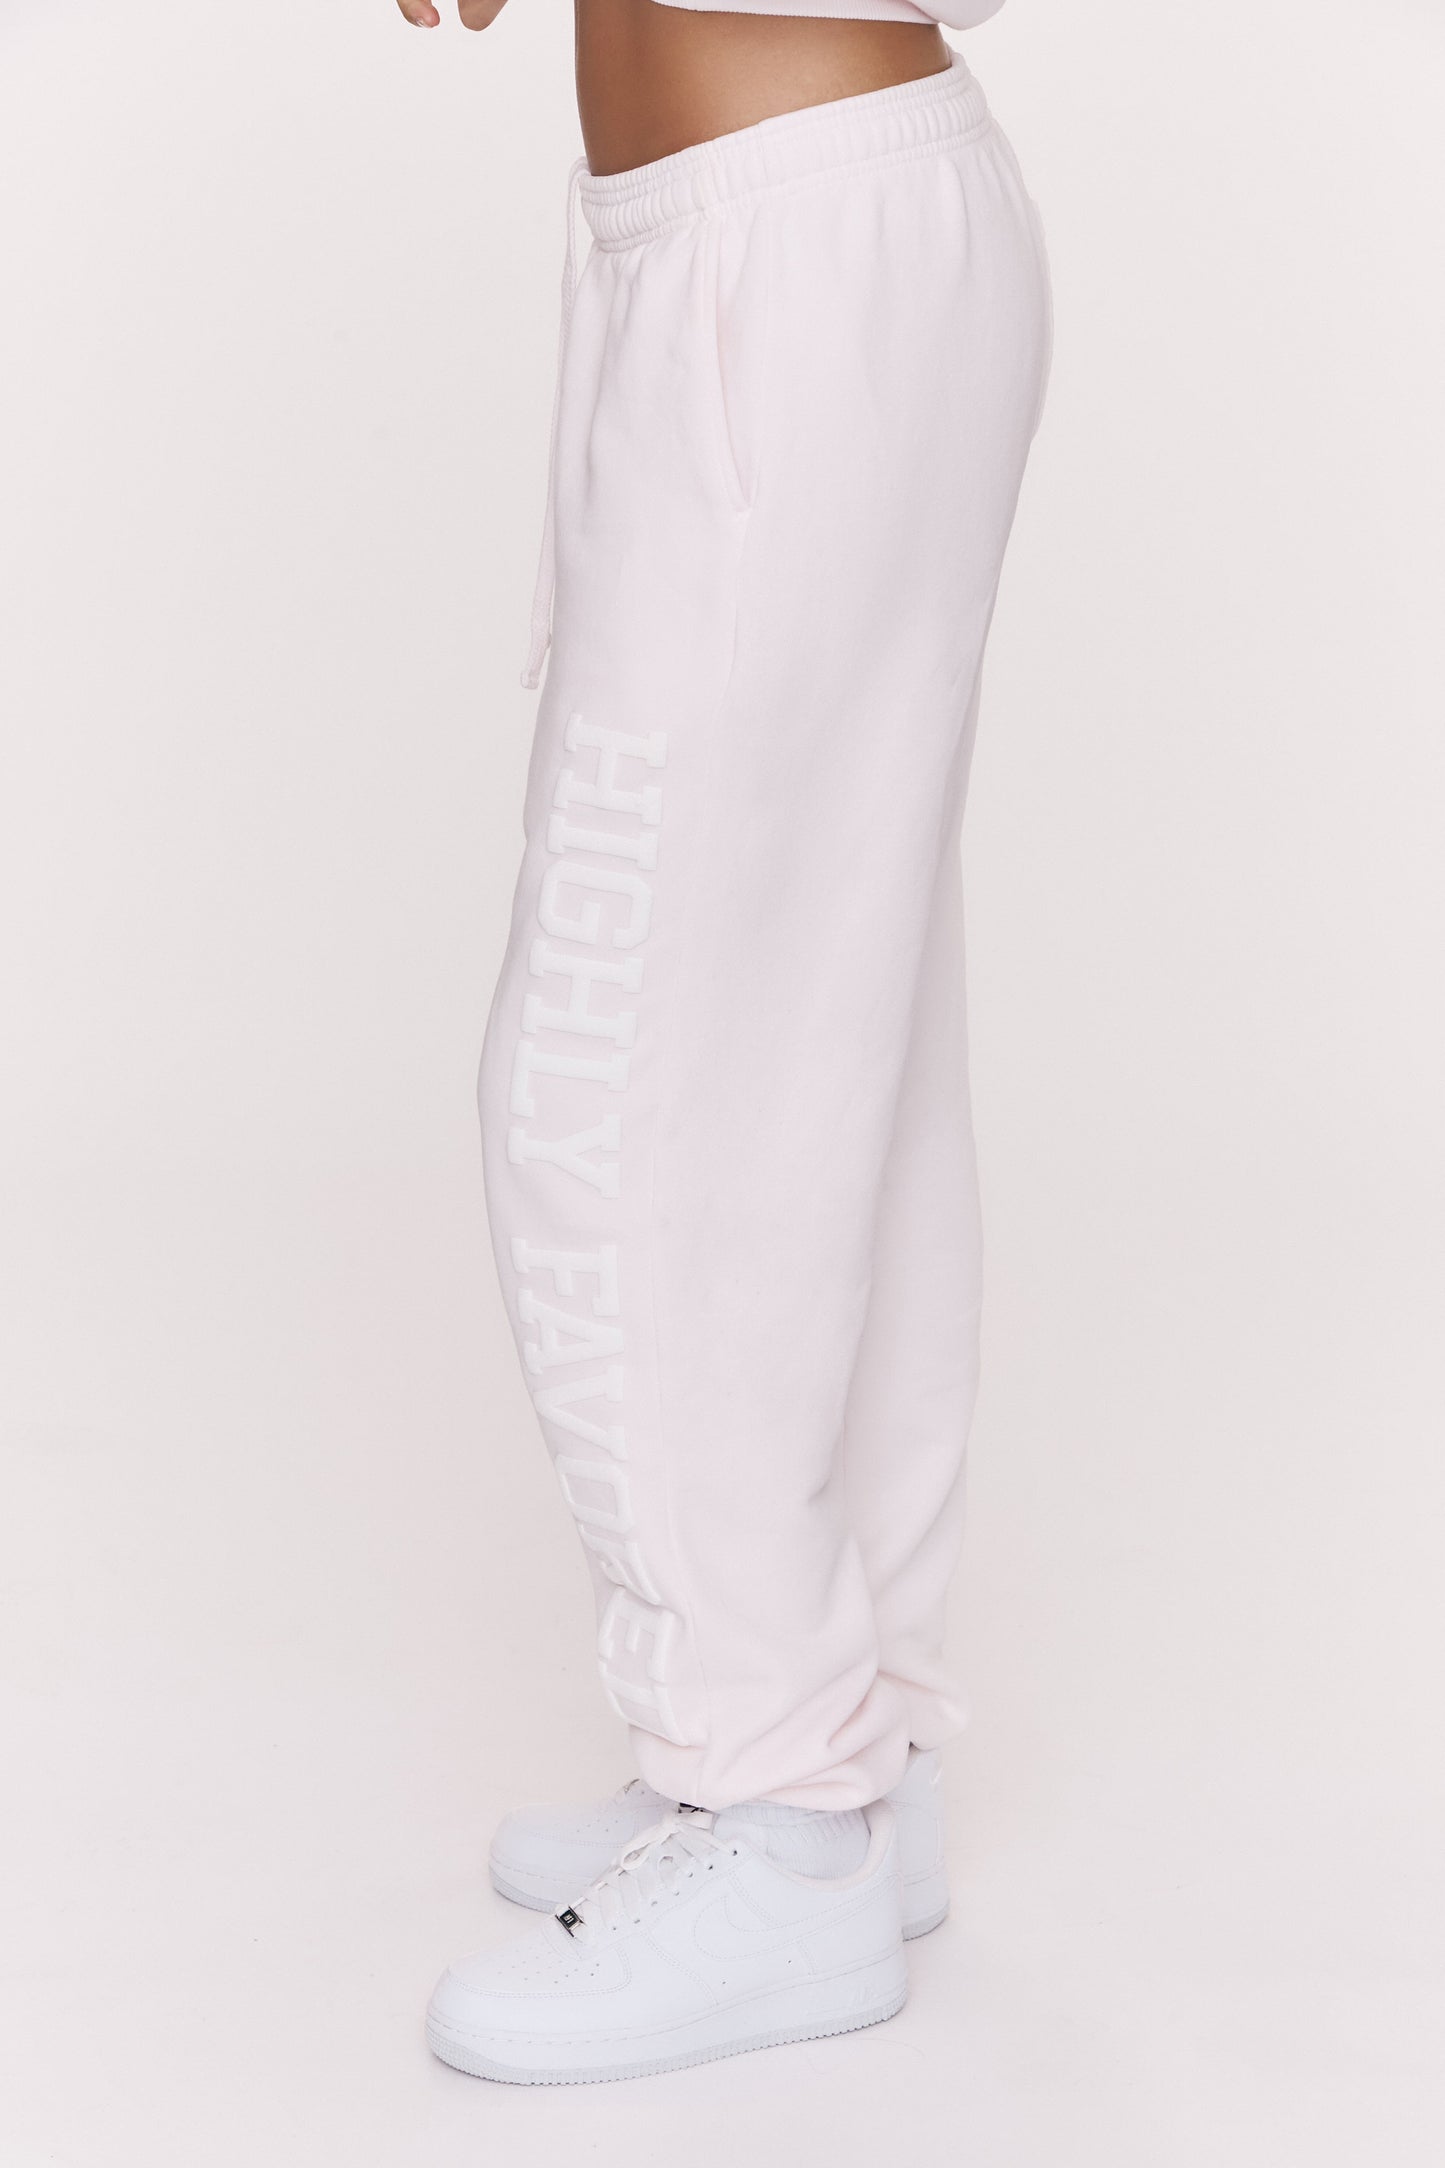 Highly Favored Sweatpants (Pink)